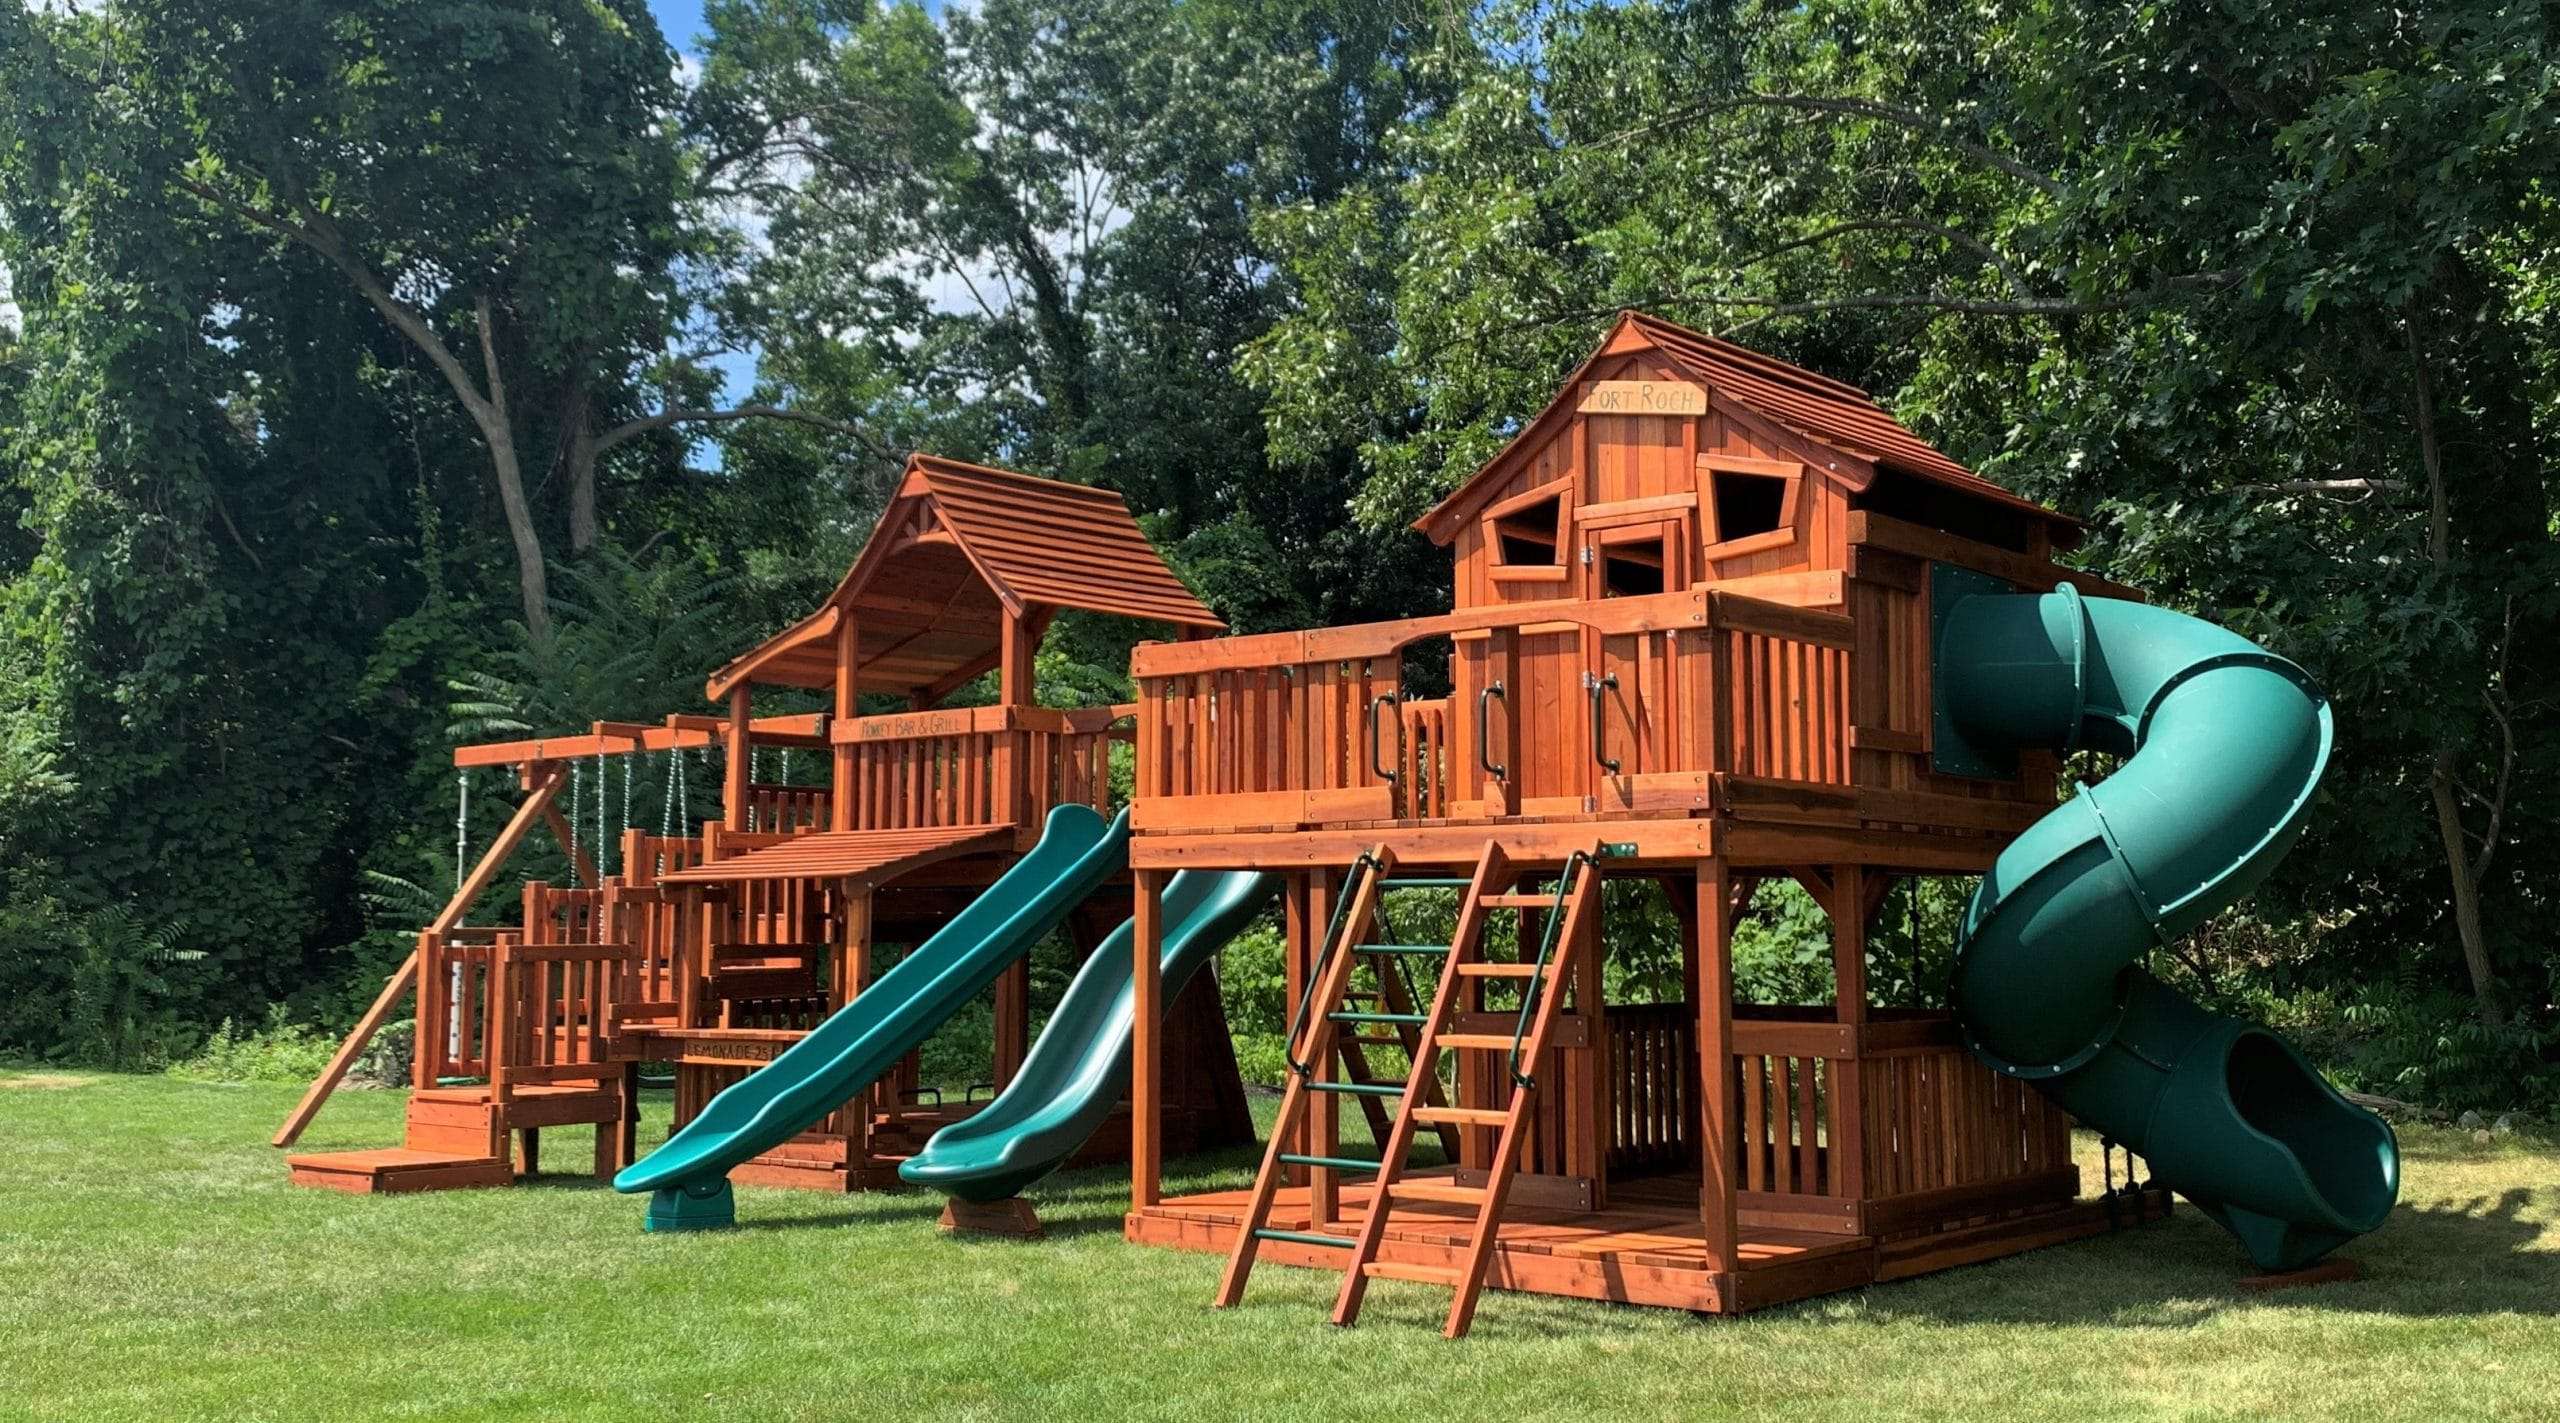 play set for sale